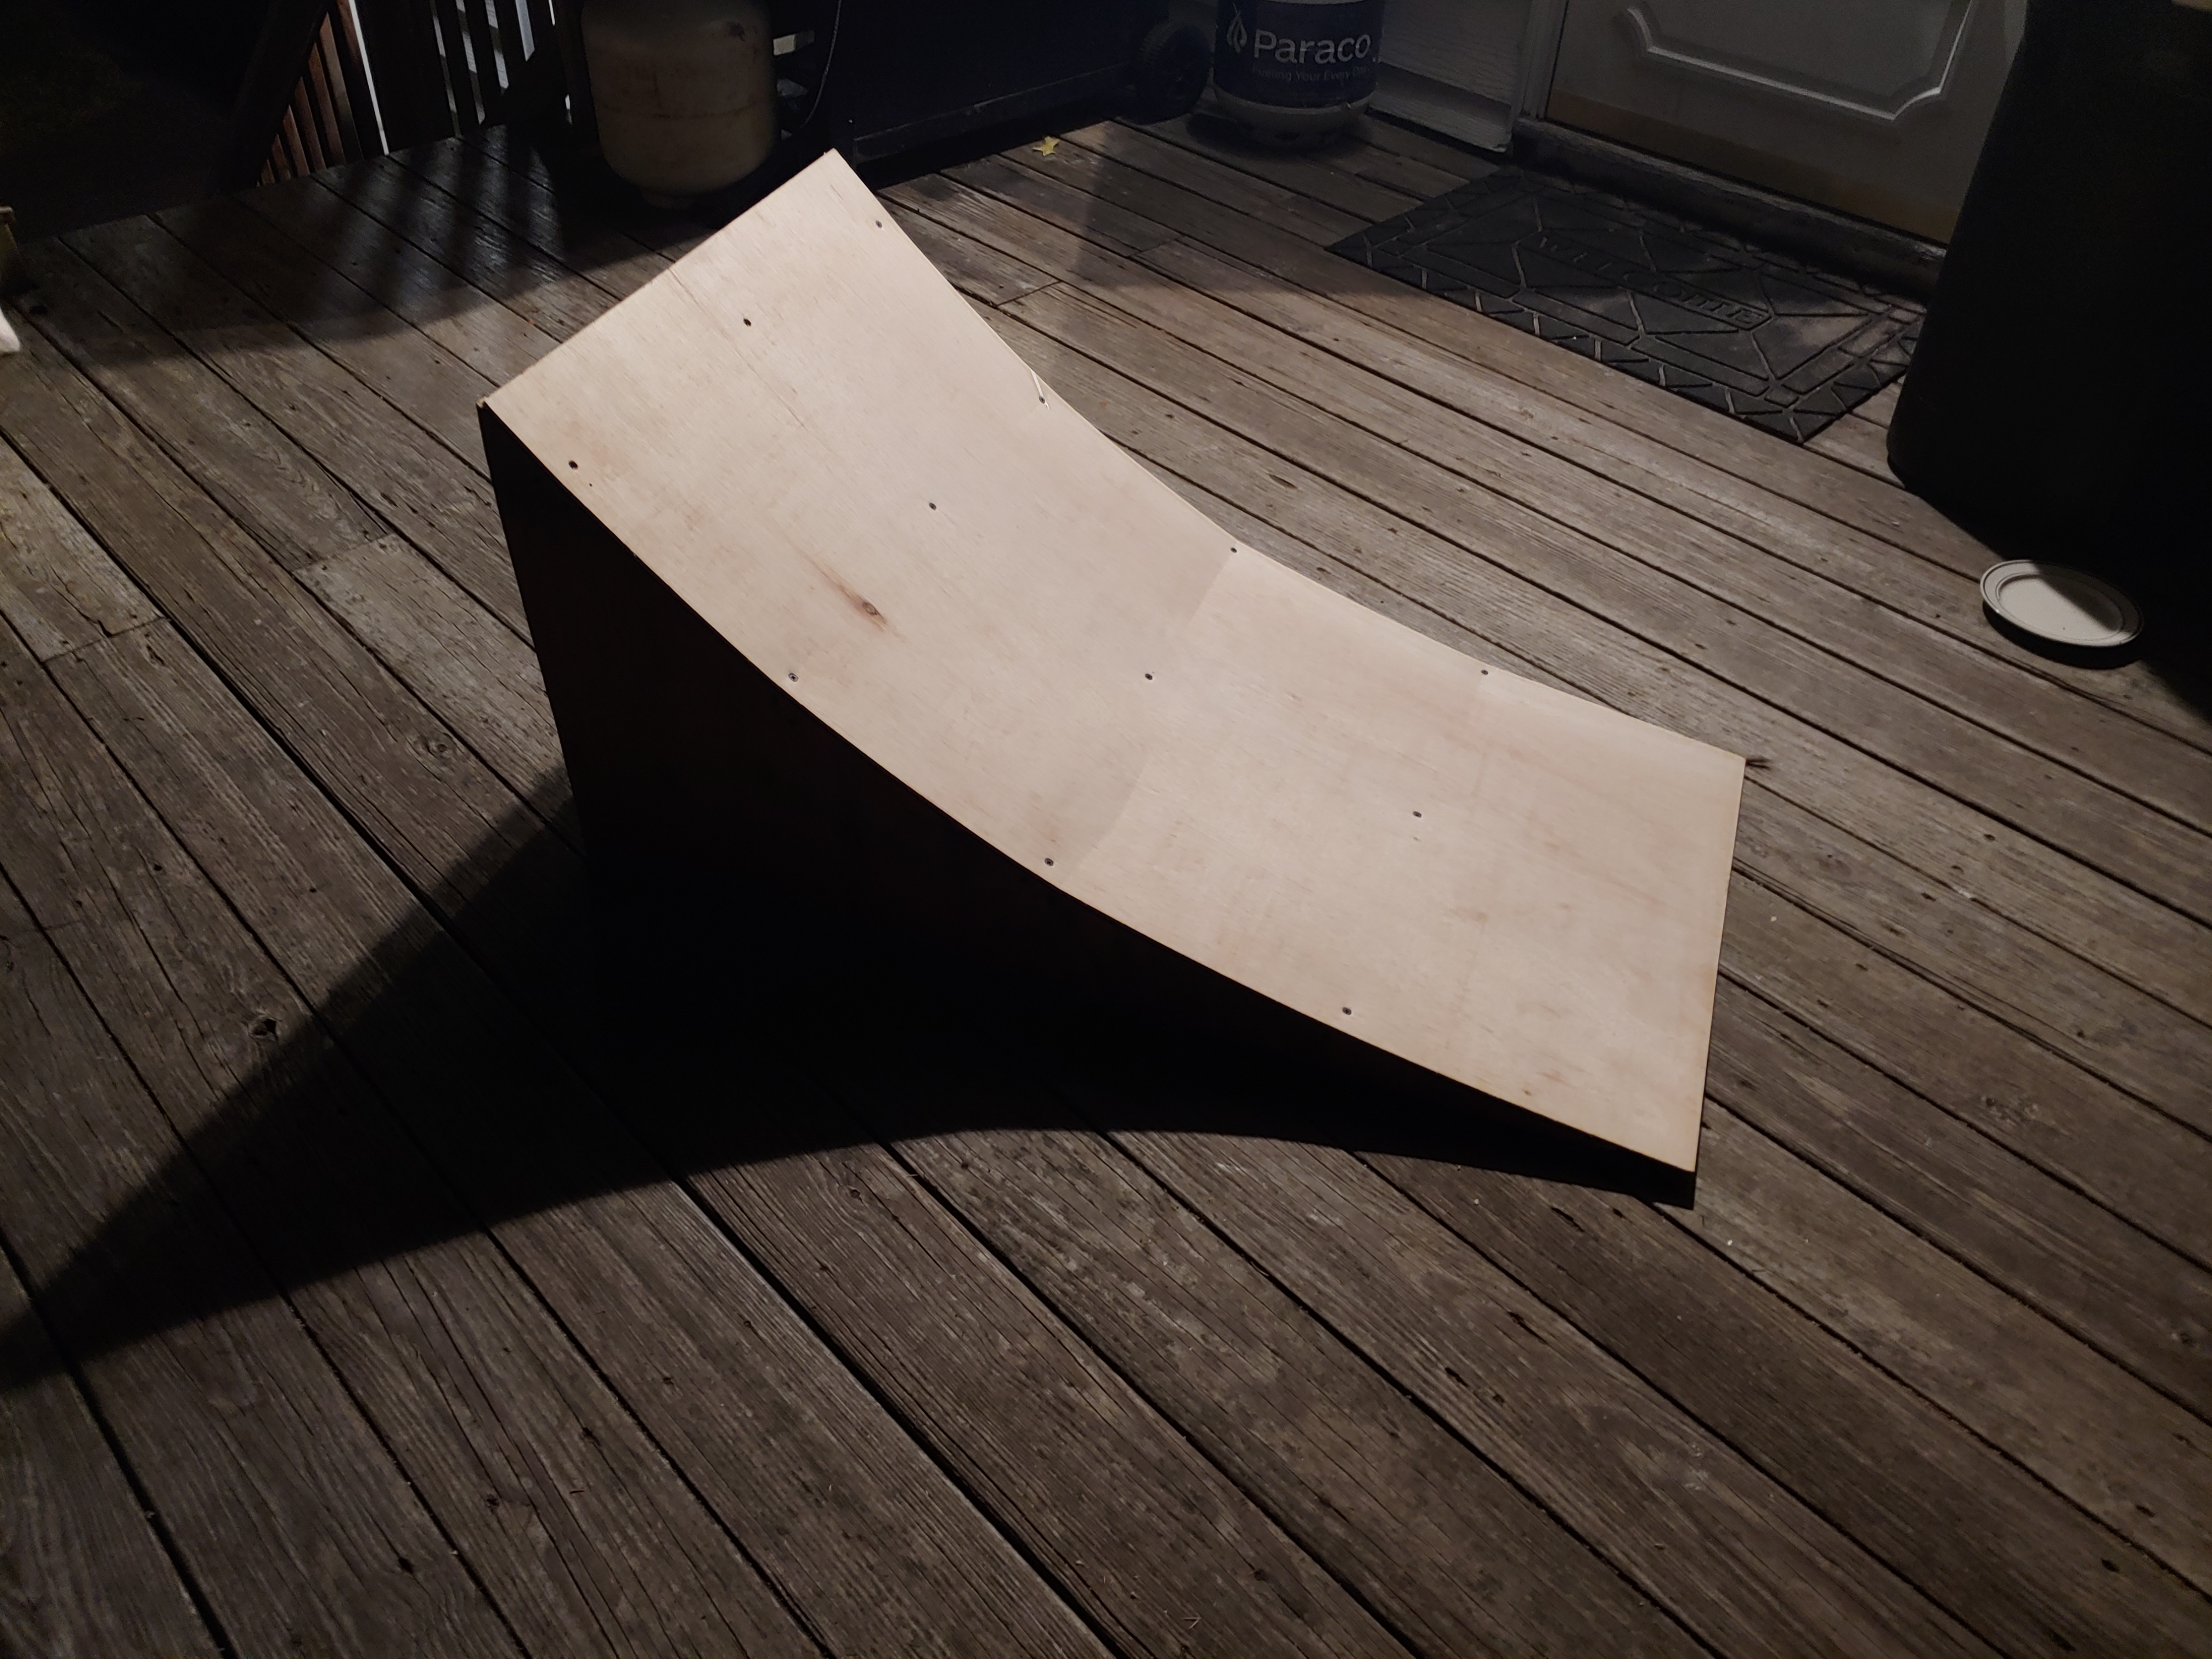 My first ramp build. Not perfect but it'll work for now.